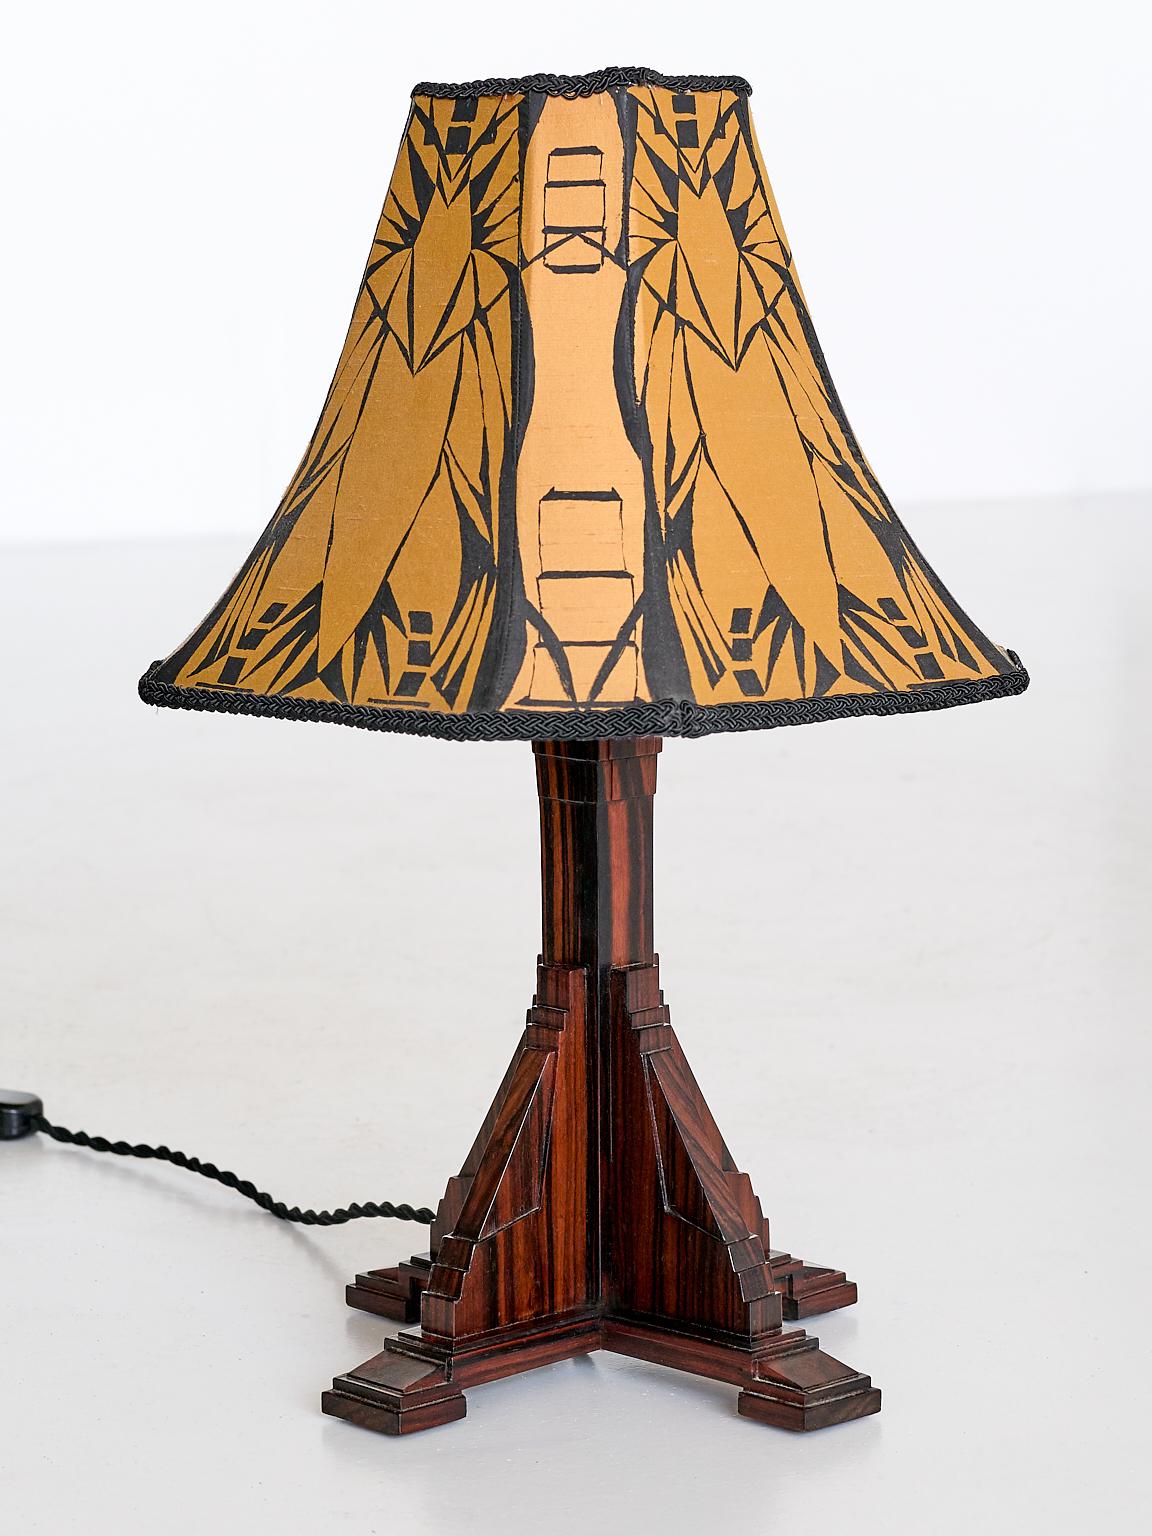 This elegant table lamp was produced in the Netherlands in the early 1930s. The tiered base rests on four square feet and is made of a veneered Macassar ebony with a striking wood grain. The meticulous manner in which the veneer has been applied